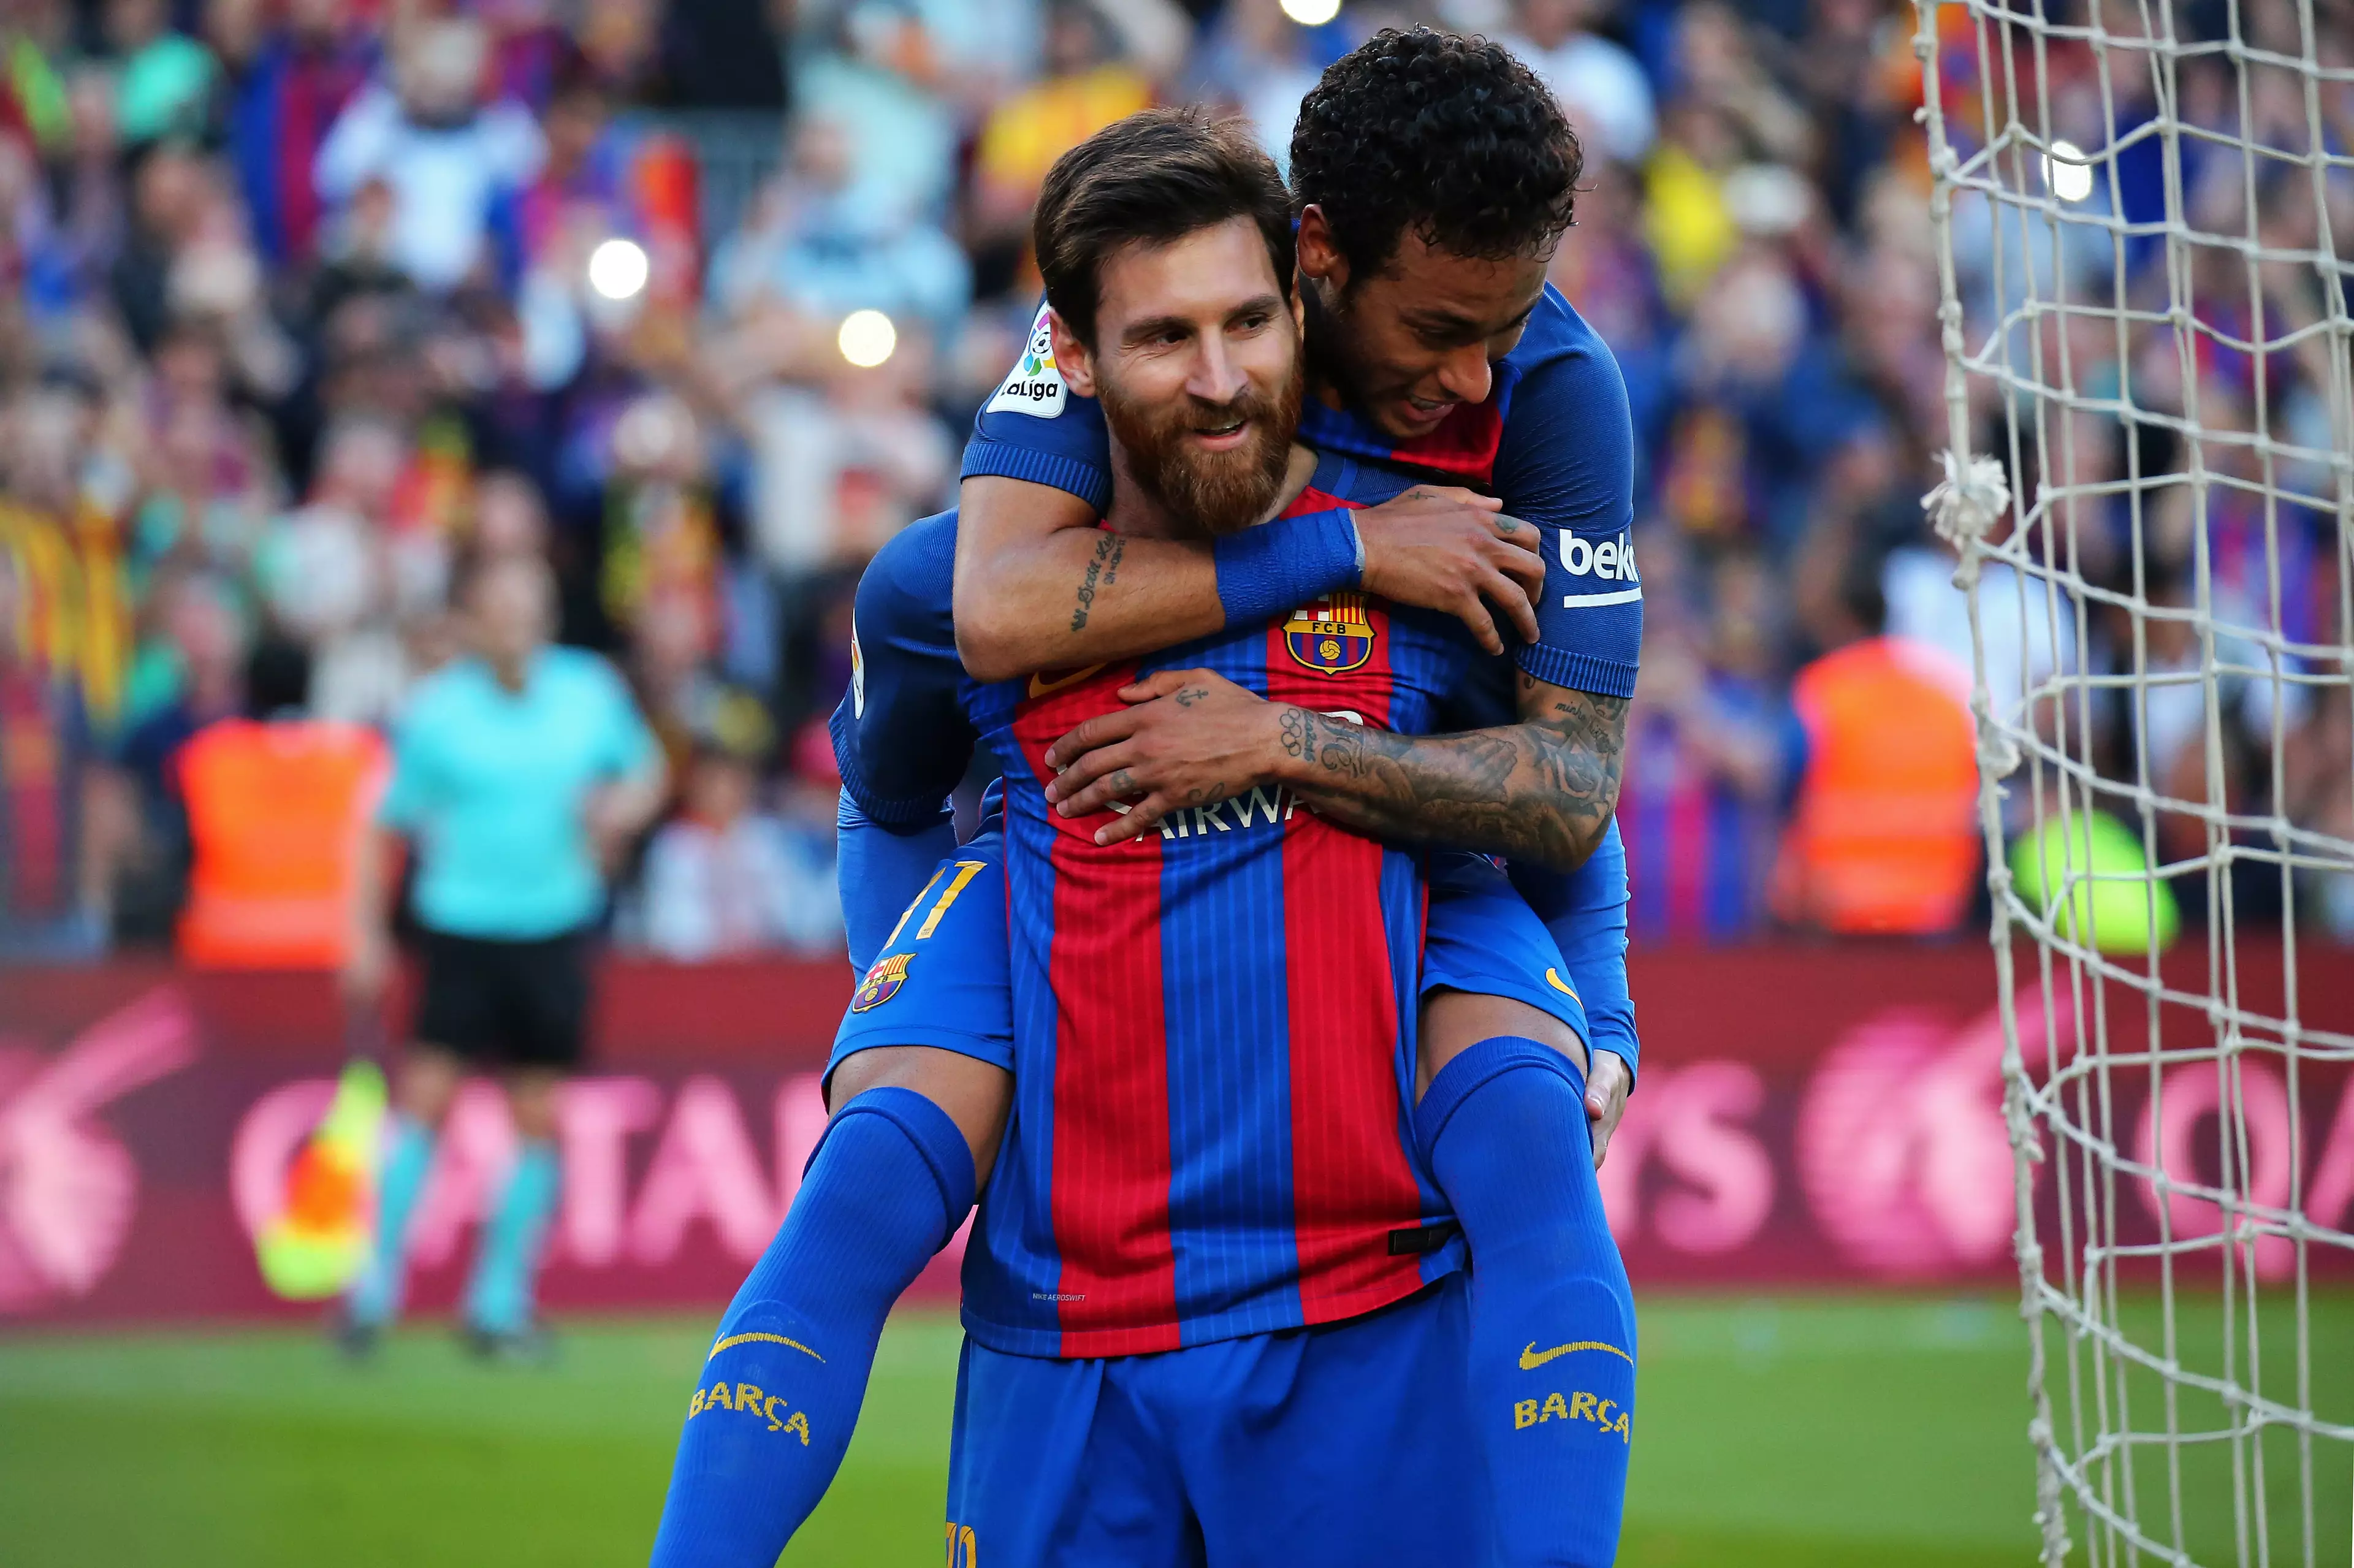 Neymar and Messi celebrate back in the day. Image: PA